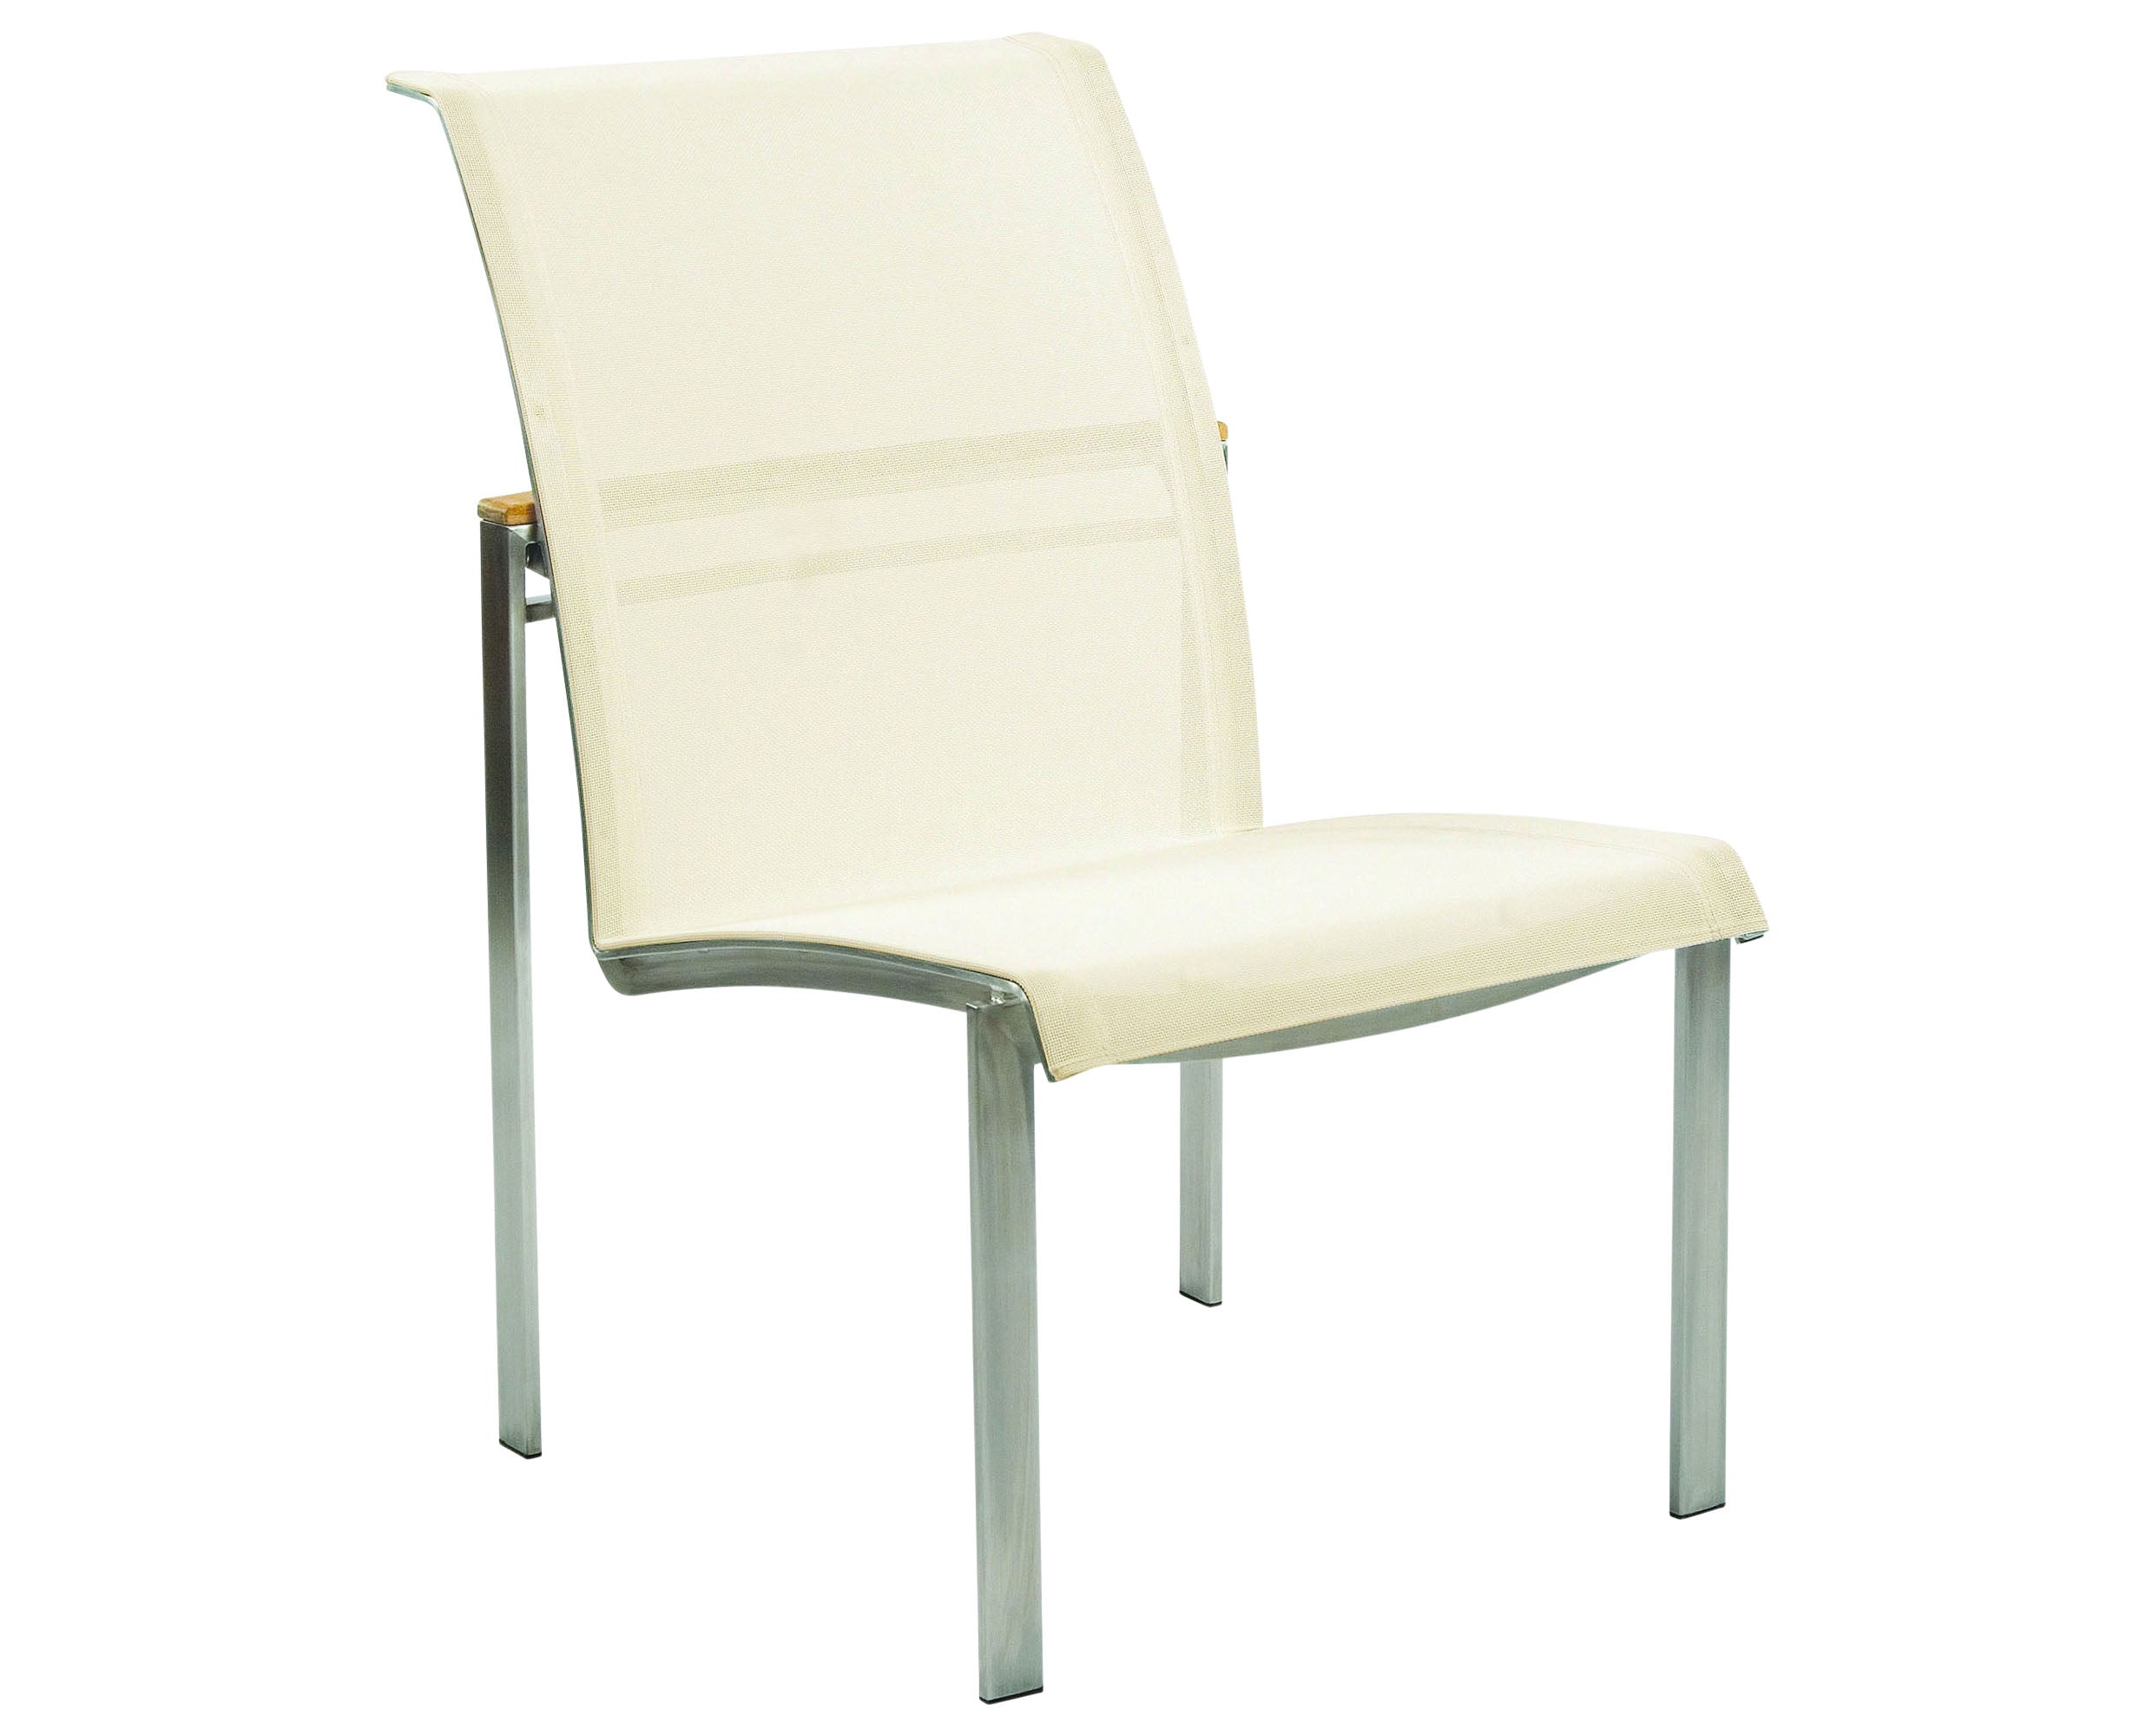 Dining Side Chair | Kingsley Bate Tivoli Collection | Valley Ridge Furniture